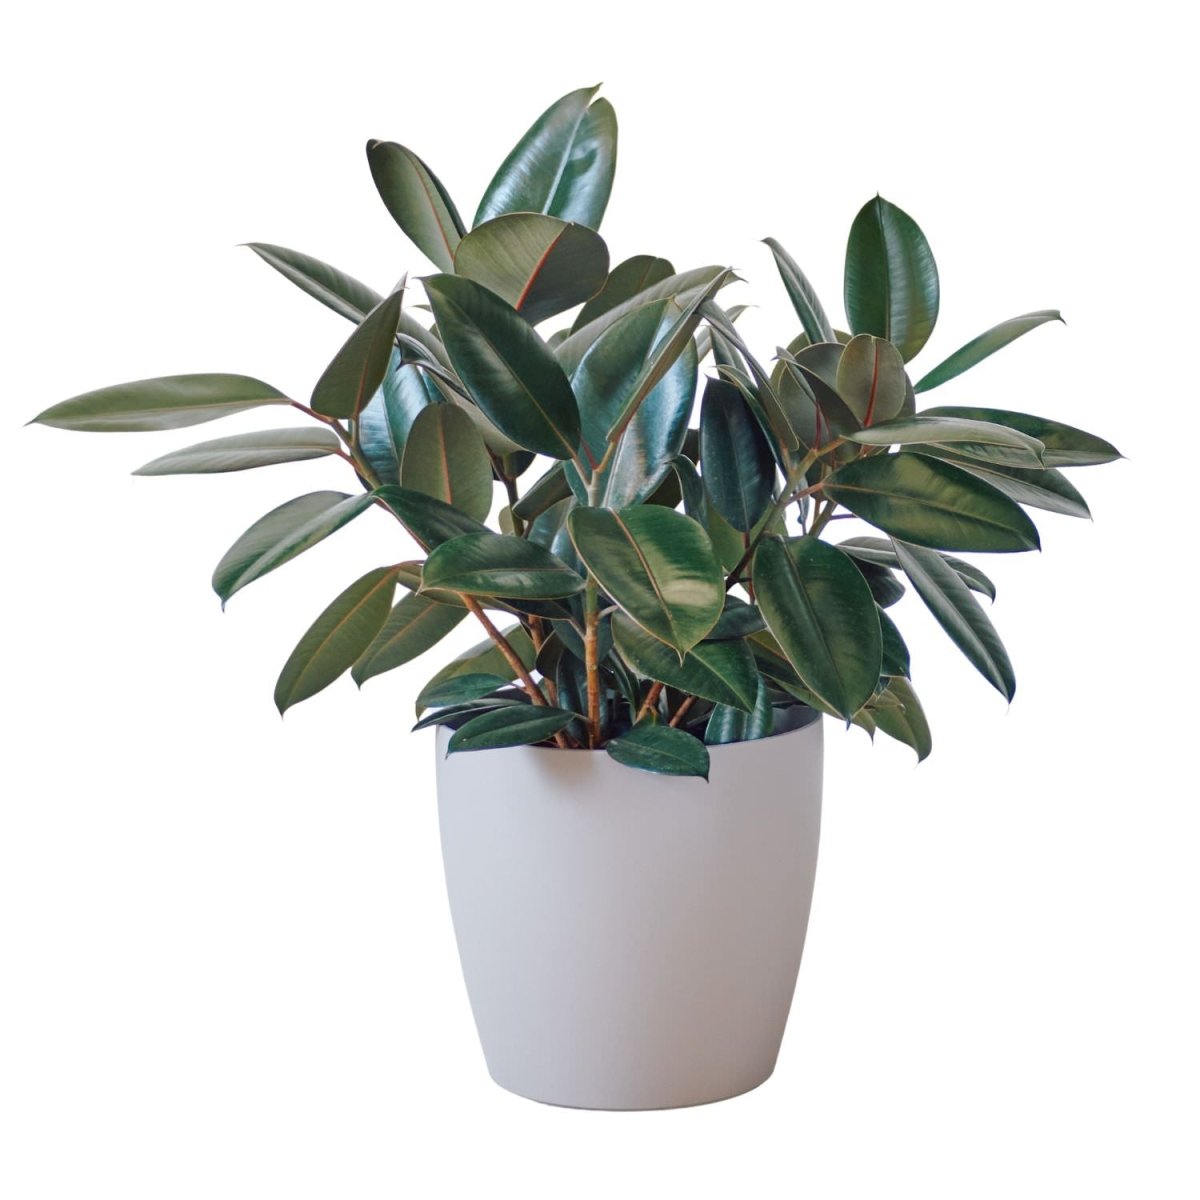 Rubber Plant Bush Potted In Lechuza Classico Trend Planter - Sand Brown - My City Plants